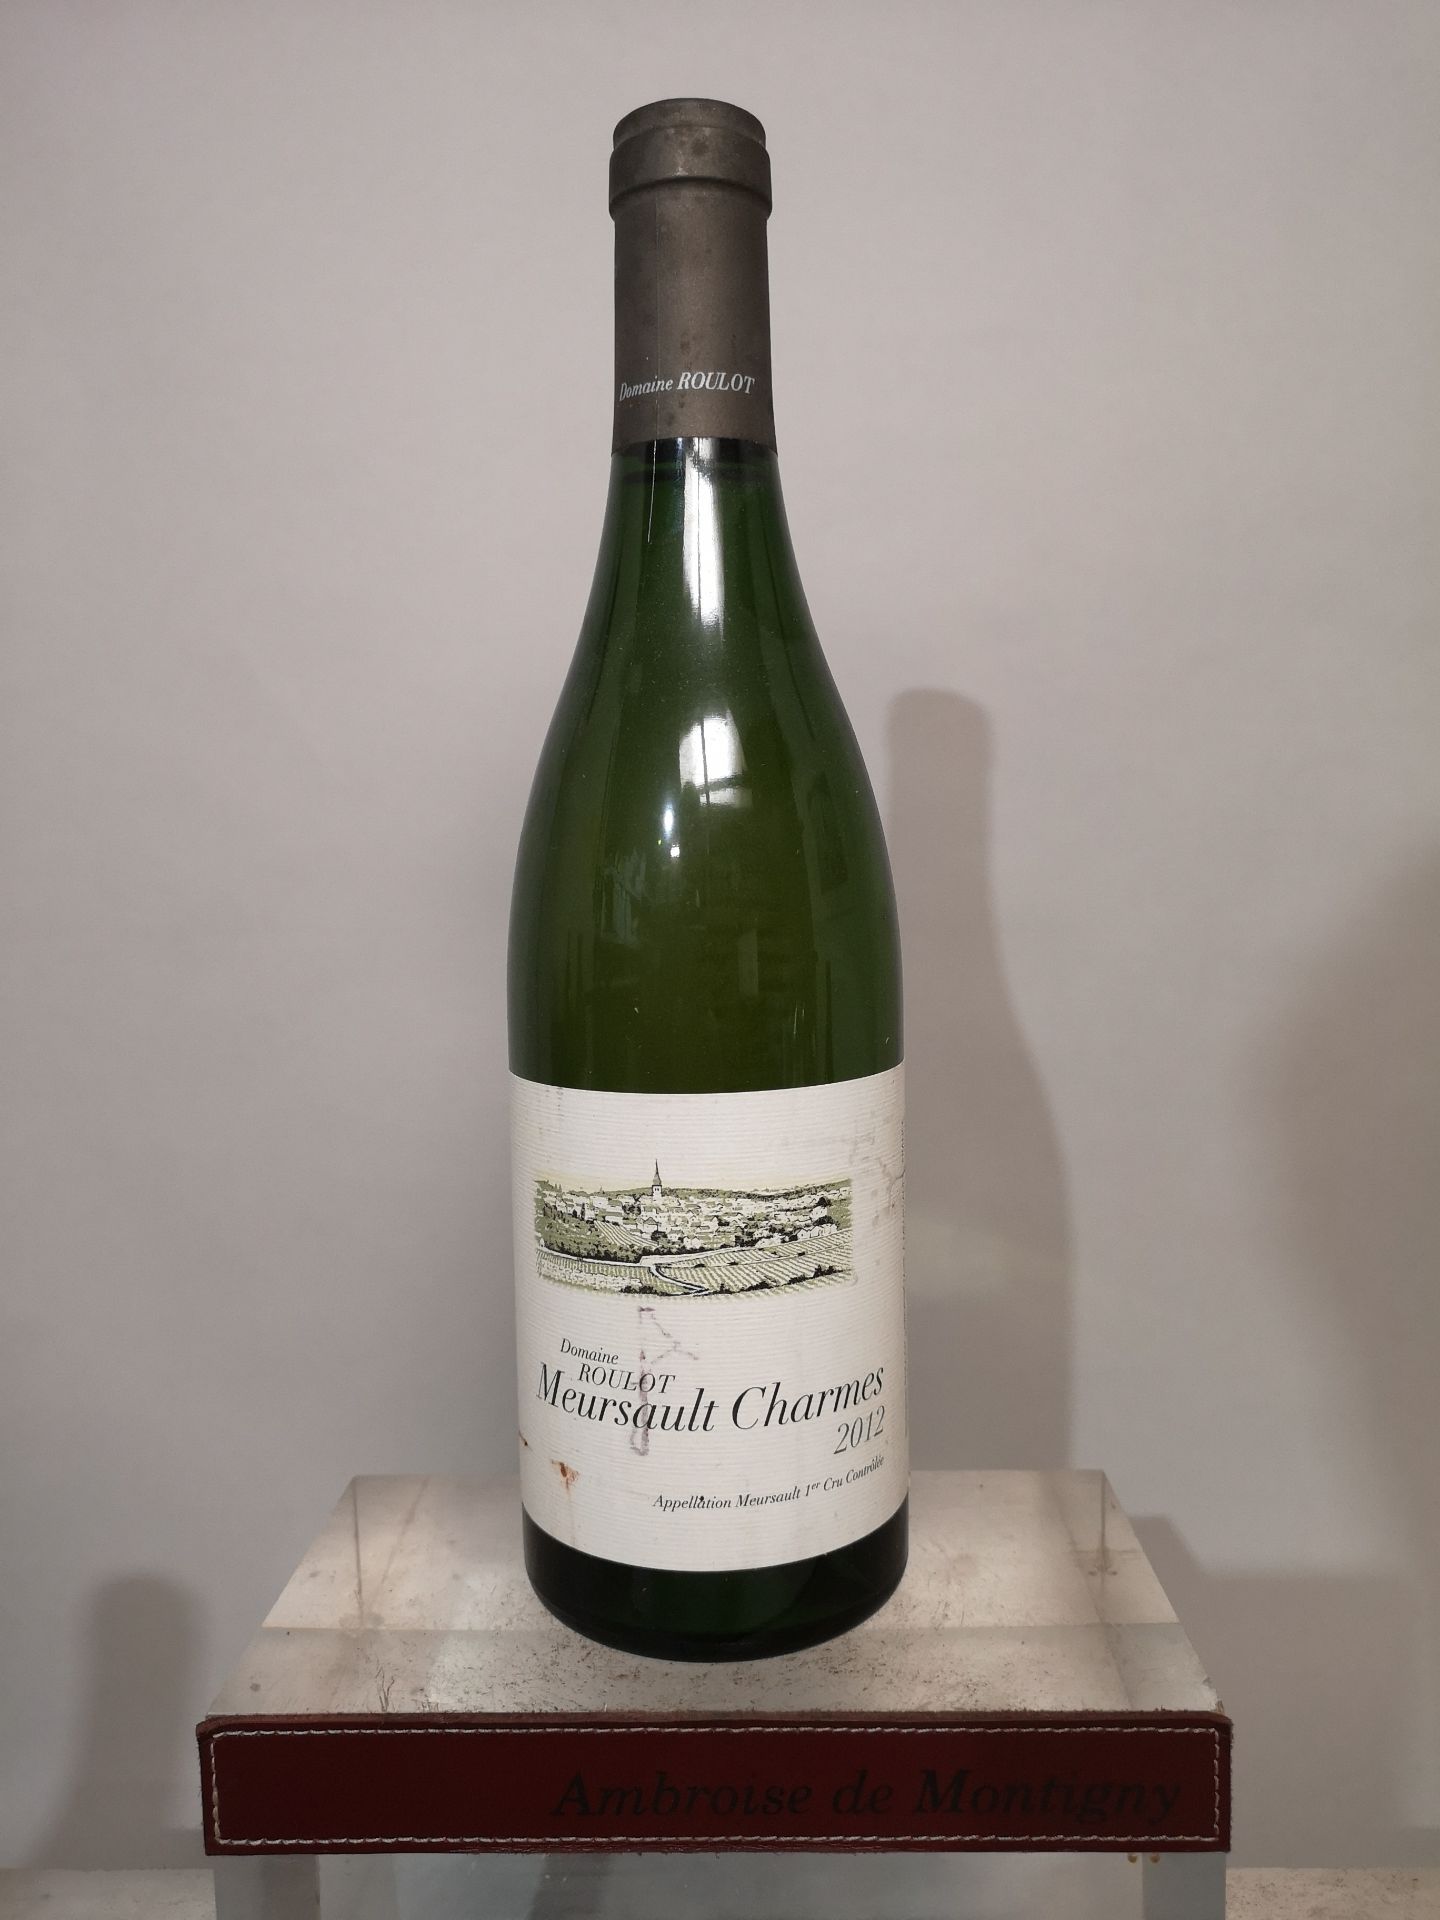 1 Bottle Meursault 1st Cru Charmes - Roulot 2012.Slightly stained label.